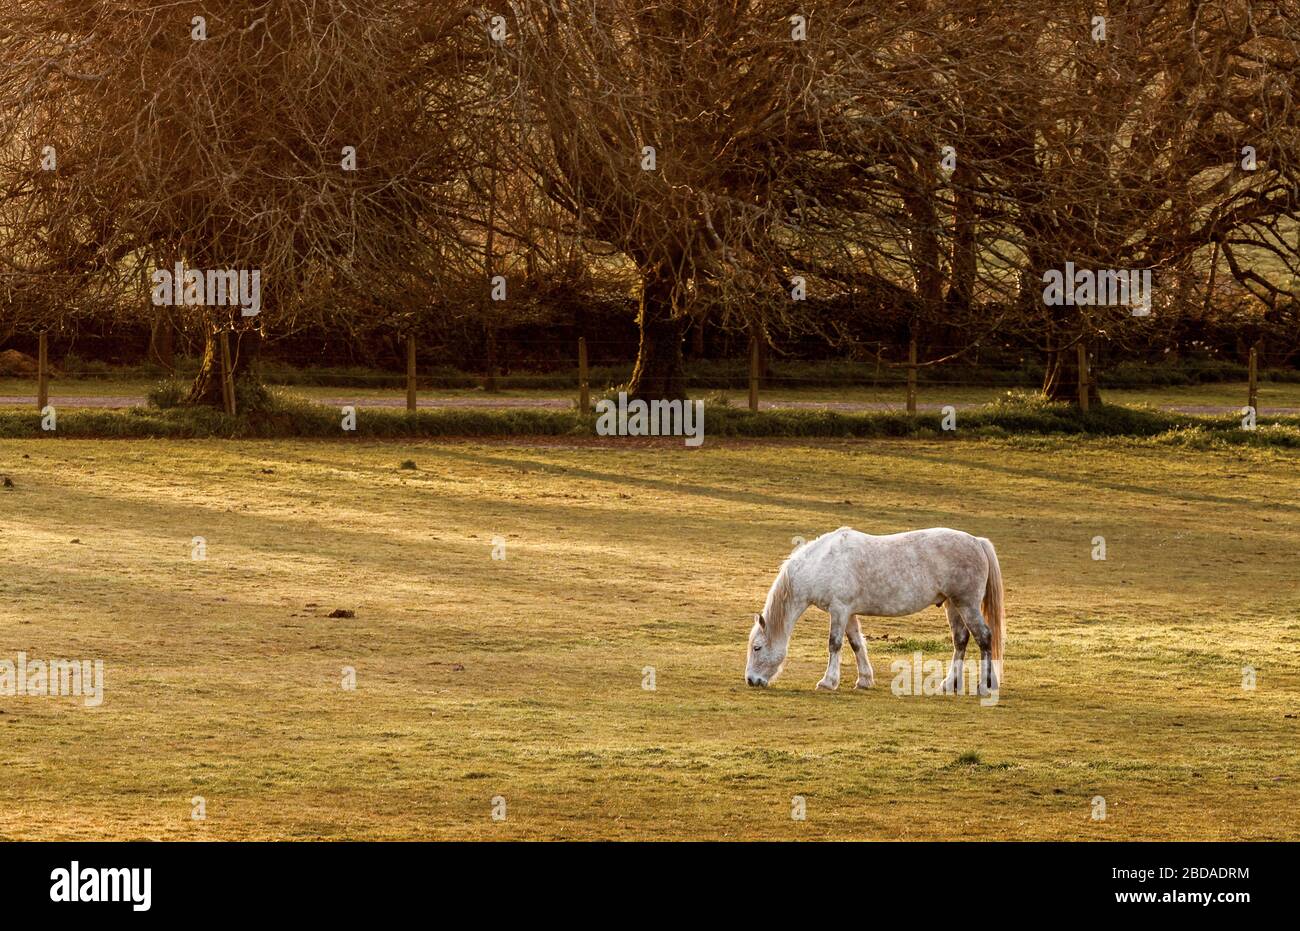 Templebreedy, Crosshaven, Cork, Ireland. 07th April, 2020. A horse grazes on farmland in late evening at Templebreedy, Crosshaven, Co. Cork, Ireland. -  Credit; David Creedon / Alamy Live News Stock Photo